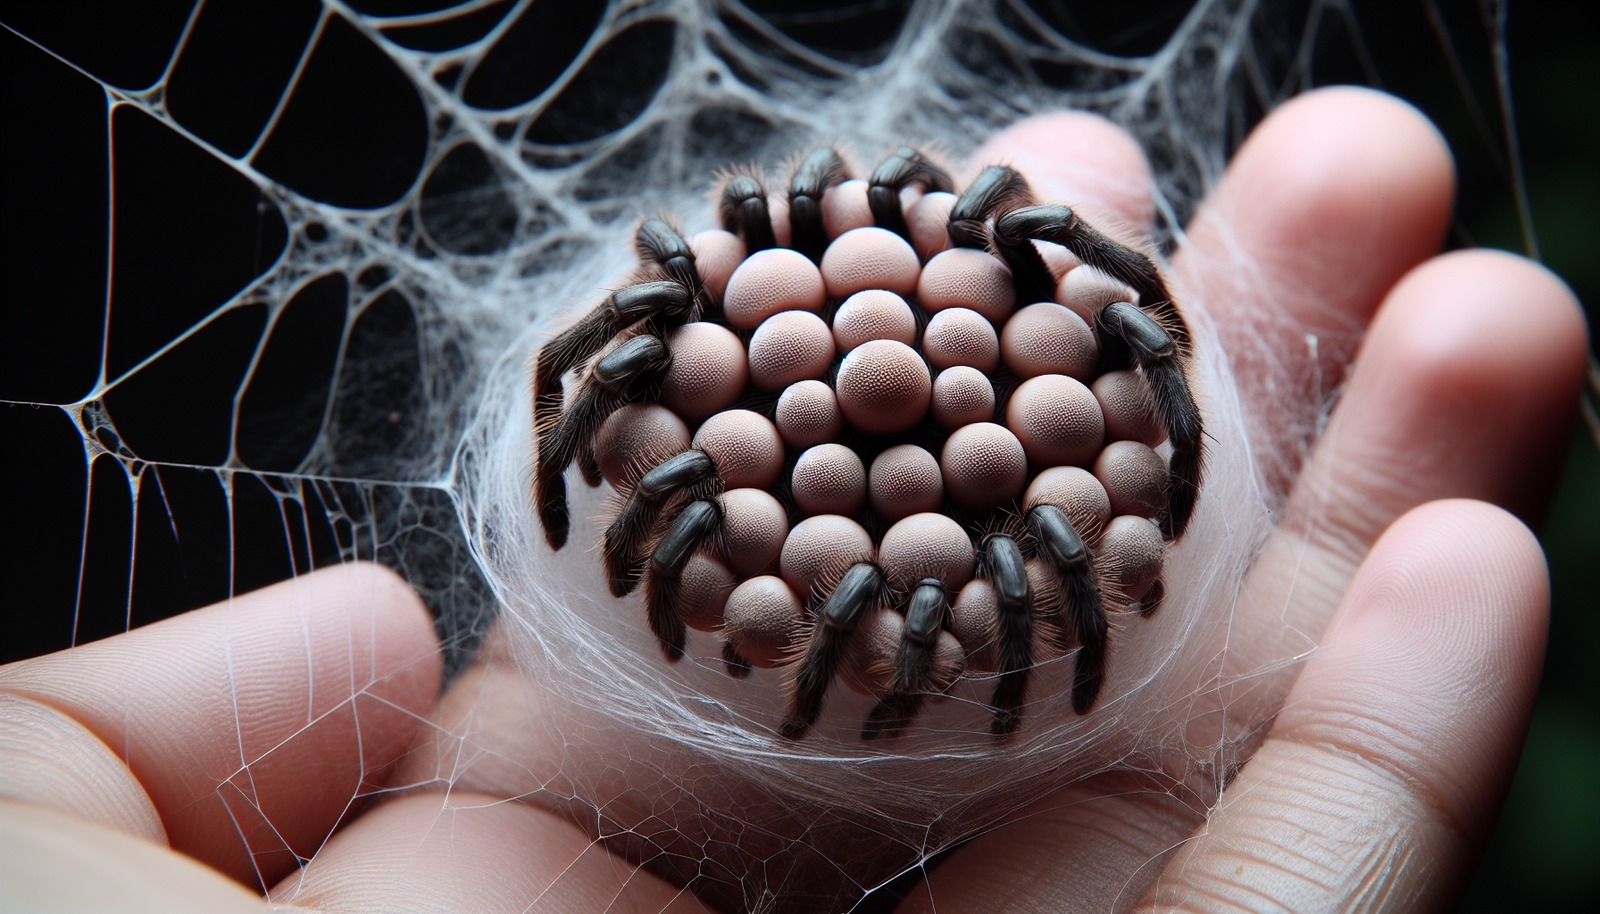 What Is The Expected Hatching Time For Tarantula Eggs?